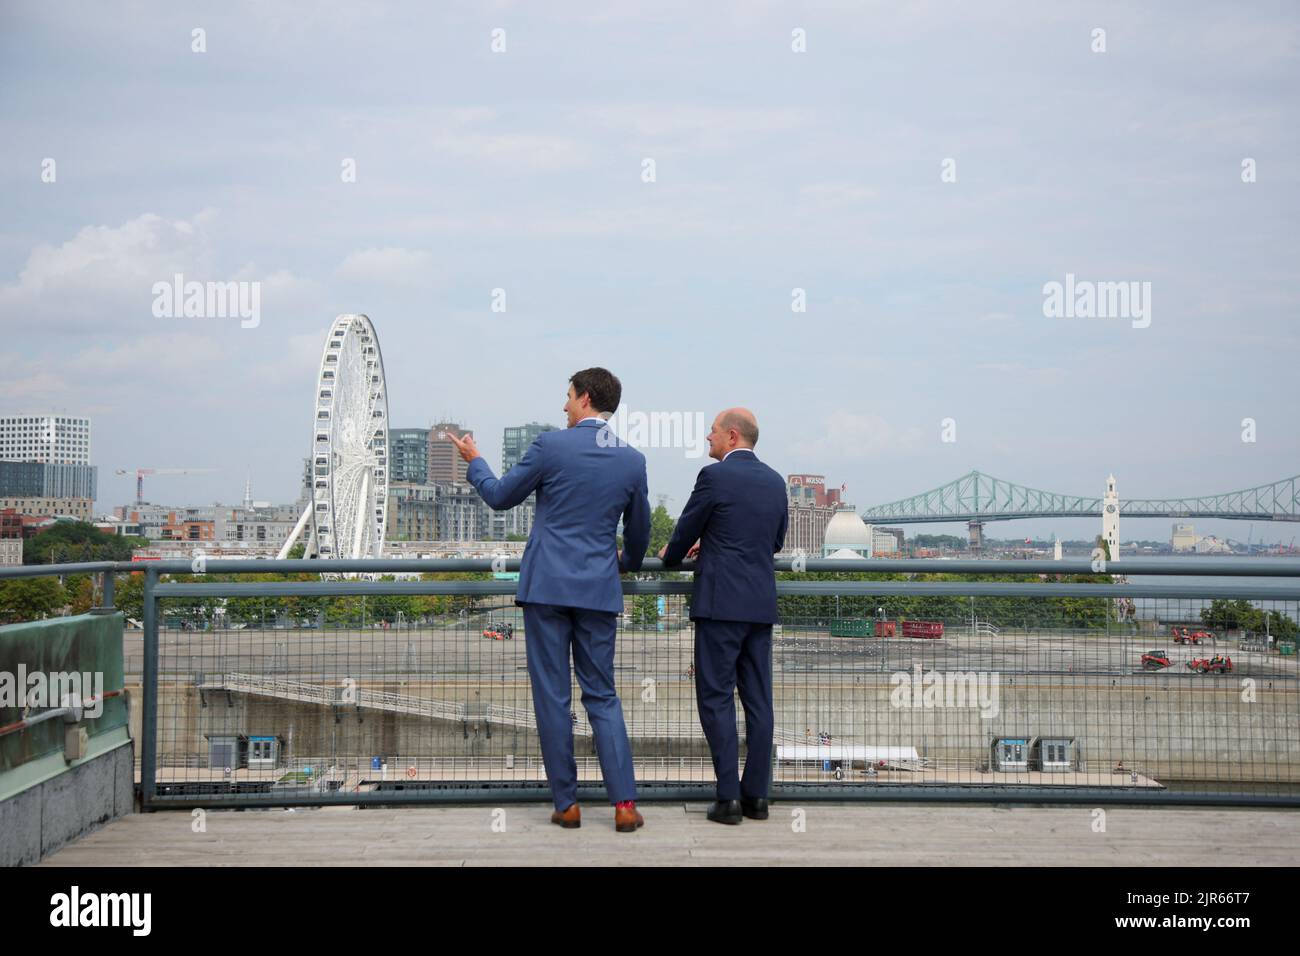 Germany's Chancellor Olaf Scholz and Canada's Prime Minister Justin Trudeau talk after a news conference outside the Montreal Science Centre, in Montreal, Quebec, Canada August 22, 2022. REUTERS/Christinne Muschi Stock Photo